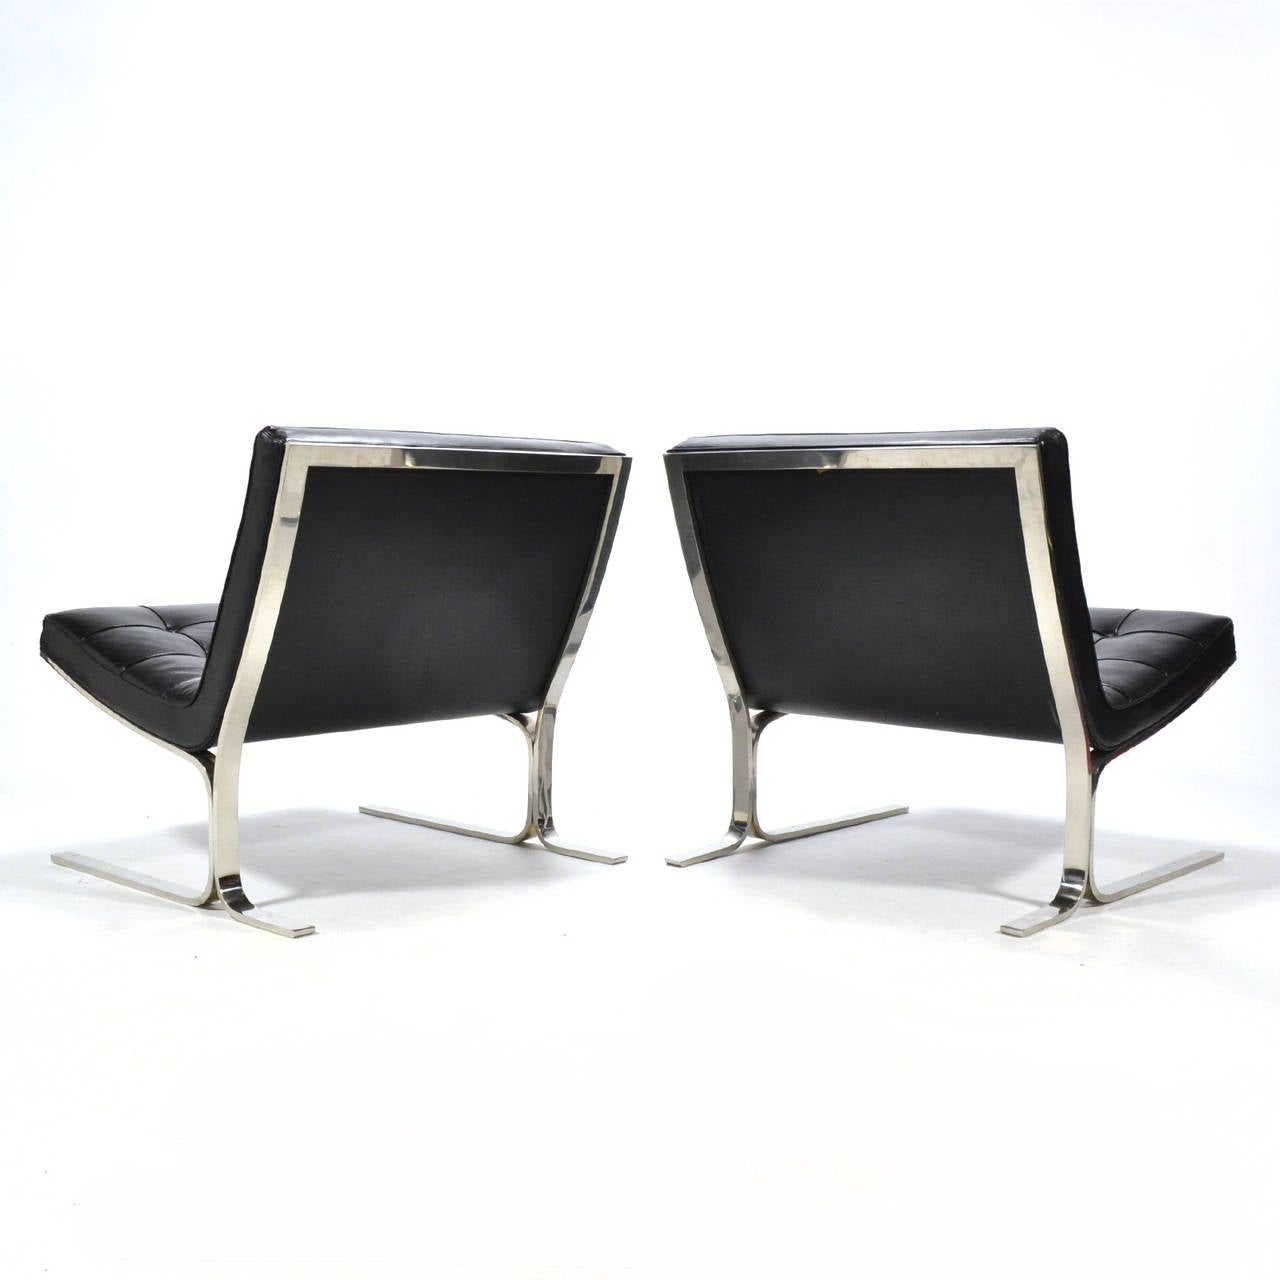 American Nicos Zographos Pair of Lounge Chairs For Sale